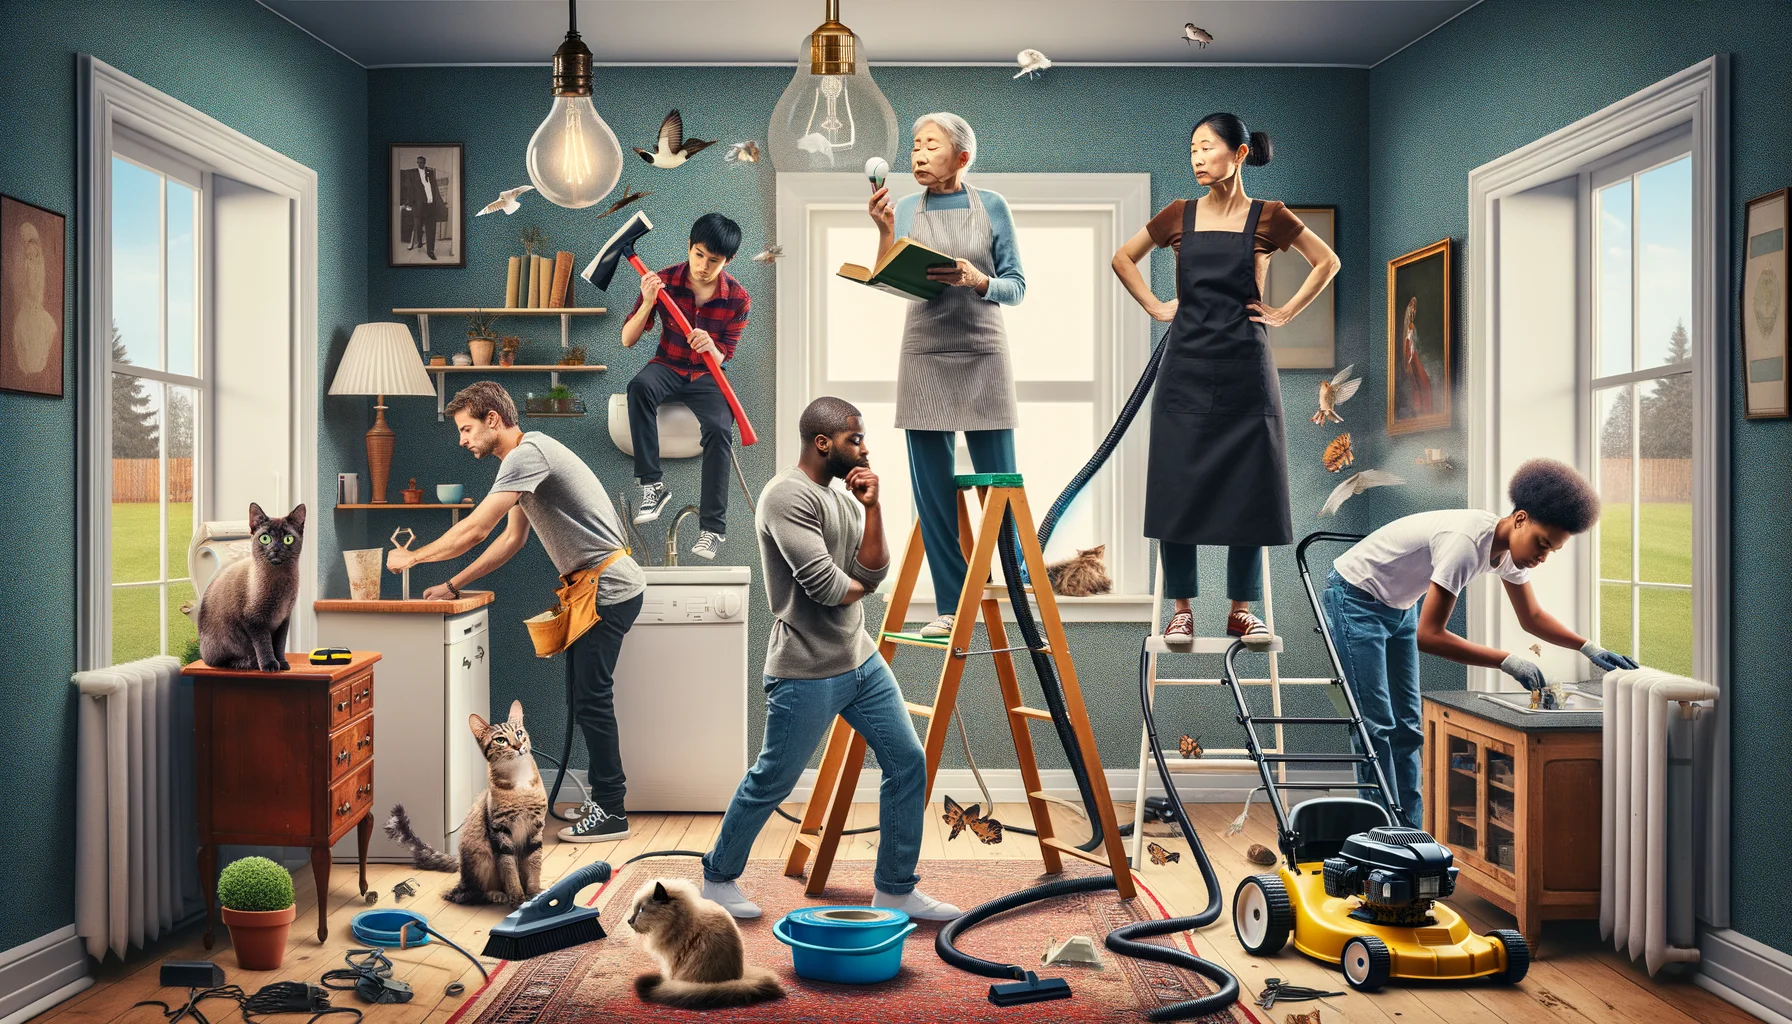 Generate a humorous and realistic image of homeownership responsibilities. Generate a scene where an East Asian woman is trying to change a lightbulb standing on a stack of books instead of a ladder, while her Caucasian male partner is attempting to fix the leaking sink with duct tape. On the side, a Hispanic youngster is vacuuming the cat instead of the floor. Meanwhile, a Black teenager can be seen mowing the roof instead of the lawn in a perplexed yet determined manner. The overall atmosphere should be one of chaos, humor, determination, and a pinch of dreaded home maintenance.